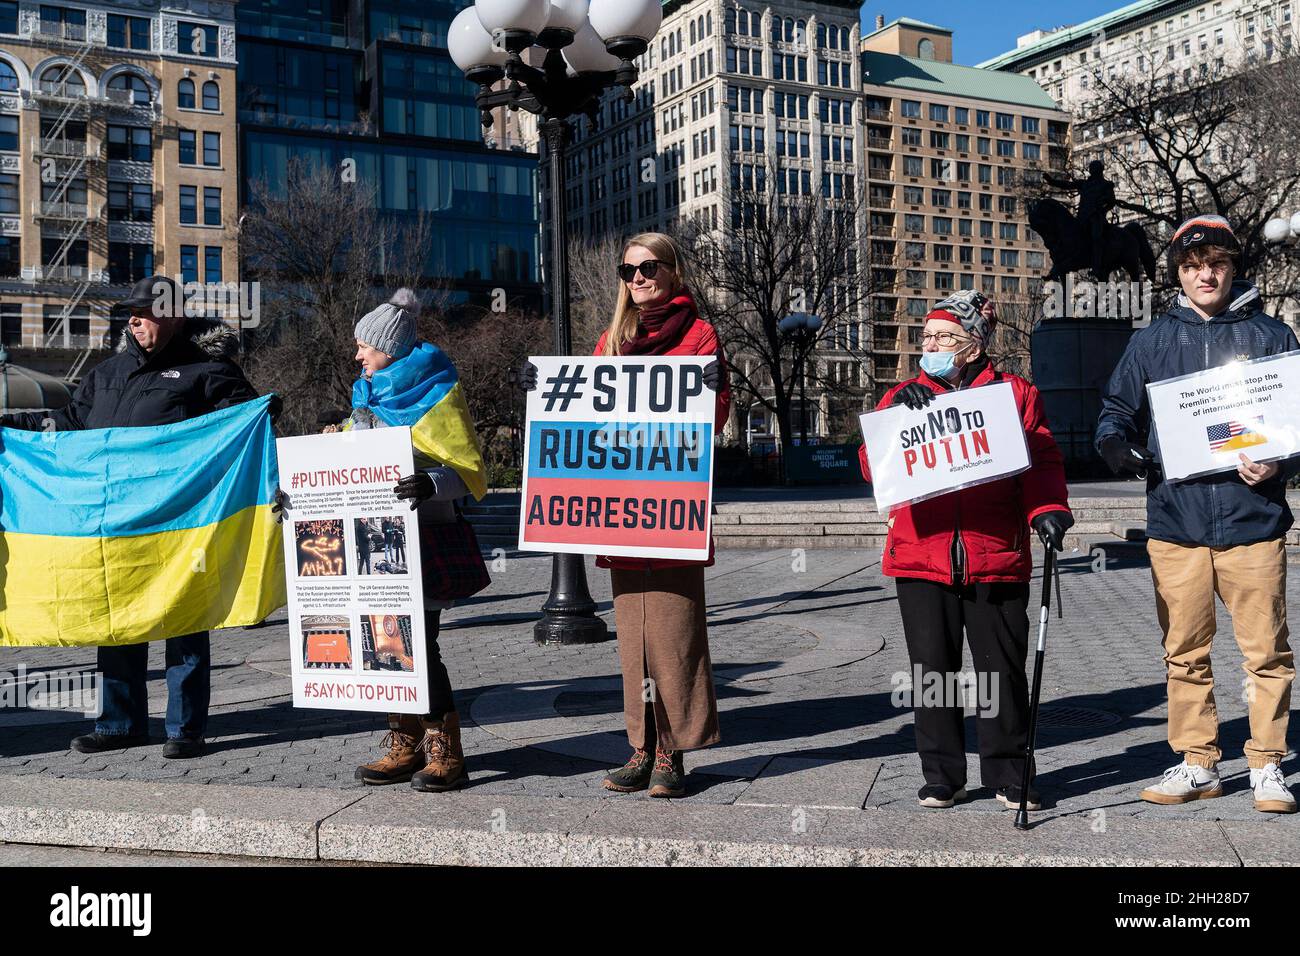 New York, United States. 22nd Jan, 2022. Protesters hold a Stand with Ukraine rally against Russian aggression on Union Square. Protesters held posters accusing Russia of crimes against Ukraine. They were also holding flags by Belarus and Georgia, symbolizing Russian interference with those countries. (Photo by Lev Radin/Pacific Press) Credit: Pacific Press Media Production Corp./Alamy Live News Stock Photo